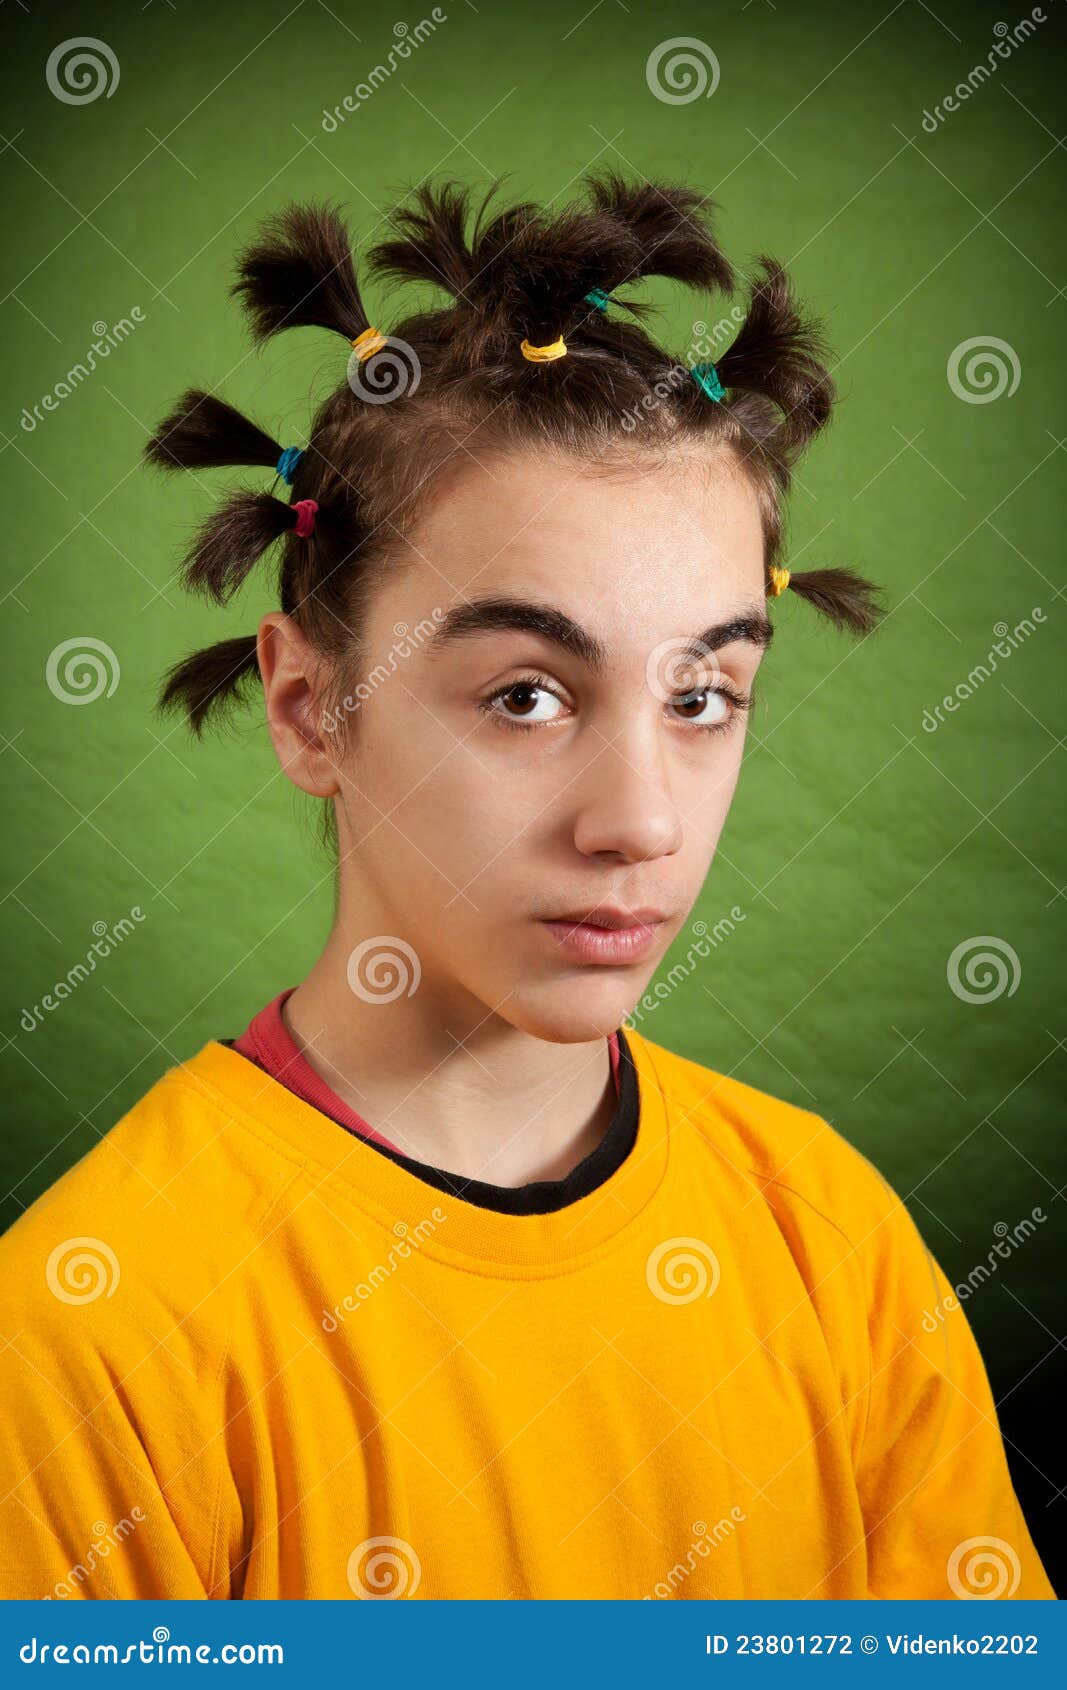 My New Hairstyle Stock Photography - Image: 23801272